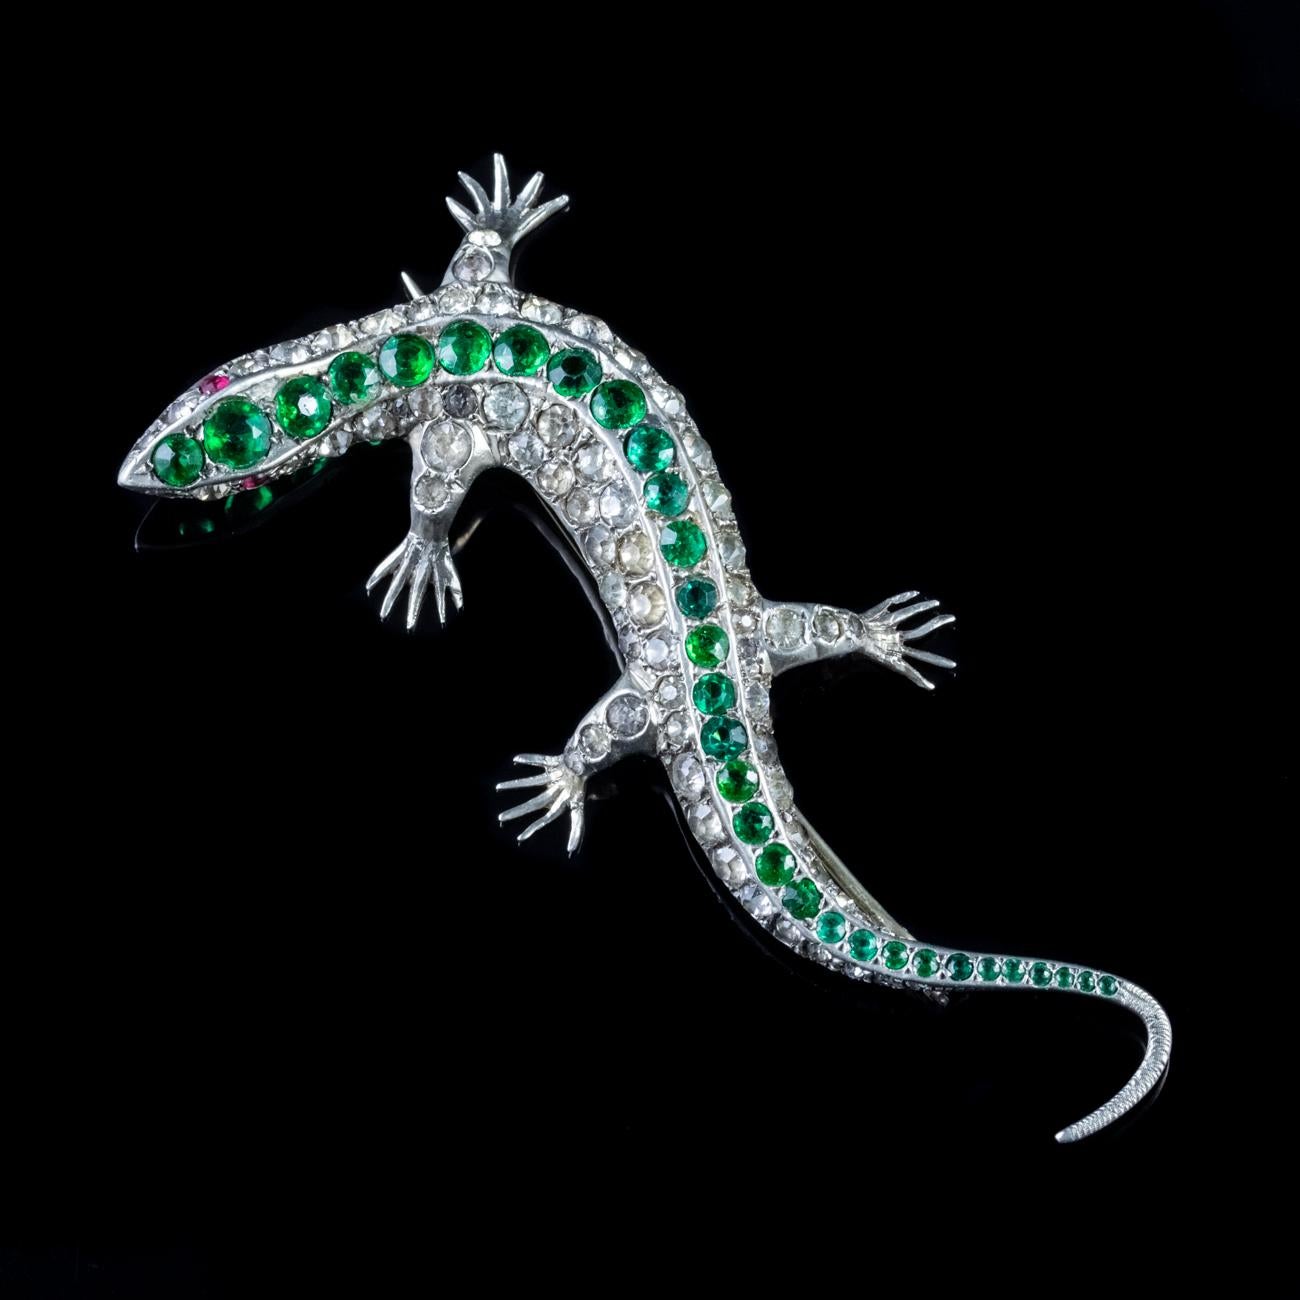 A fabulous Antique Victorian brooch modelled in Sterling Silver, depicting a colourful lizard decorated with stripes of old cut emerald green and white Pastes Stones down the back and red Paste eyes. 

Victorian jewellery mirrored Queen Victoria’s